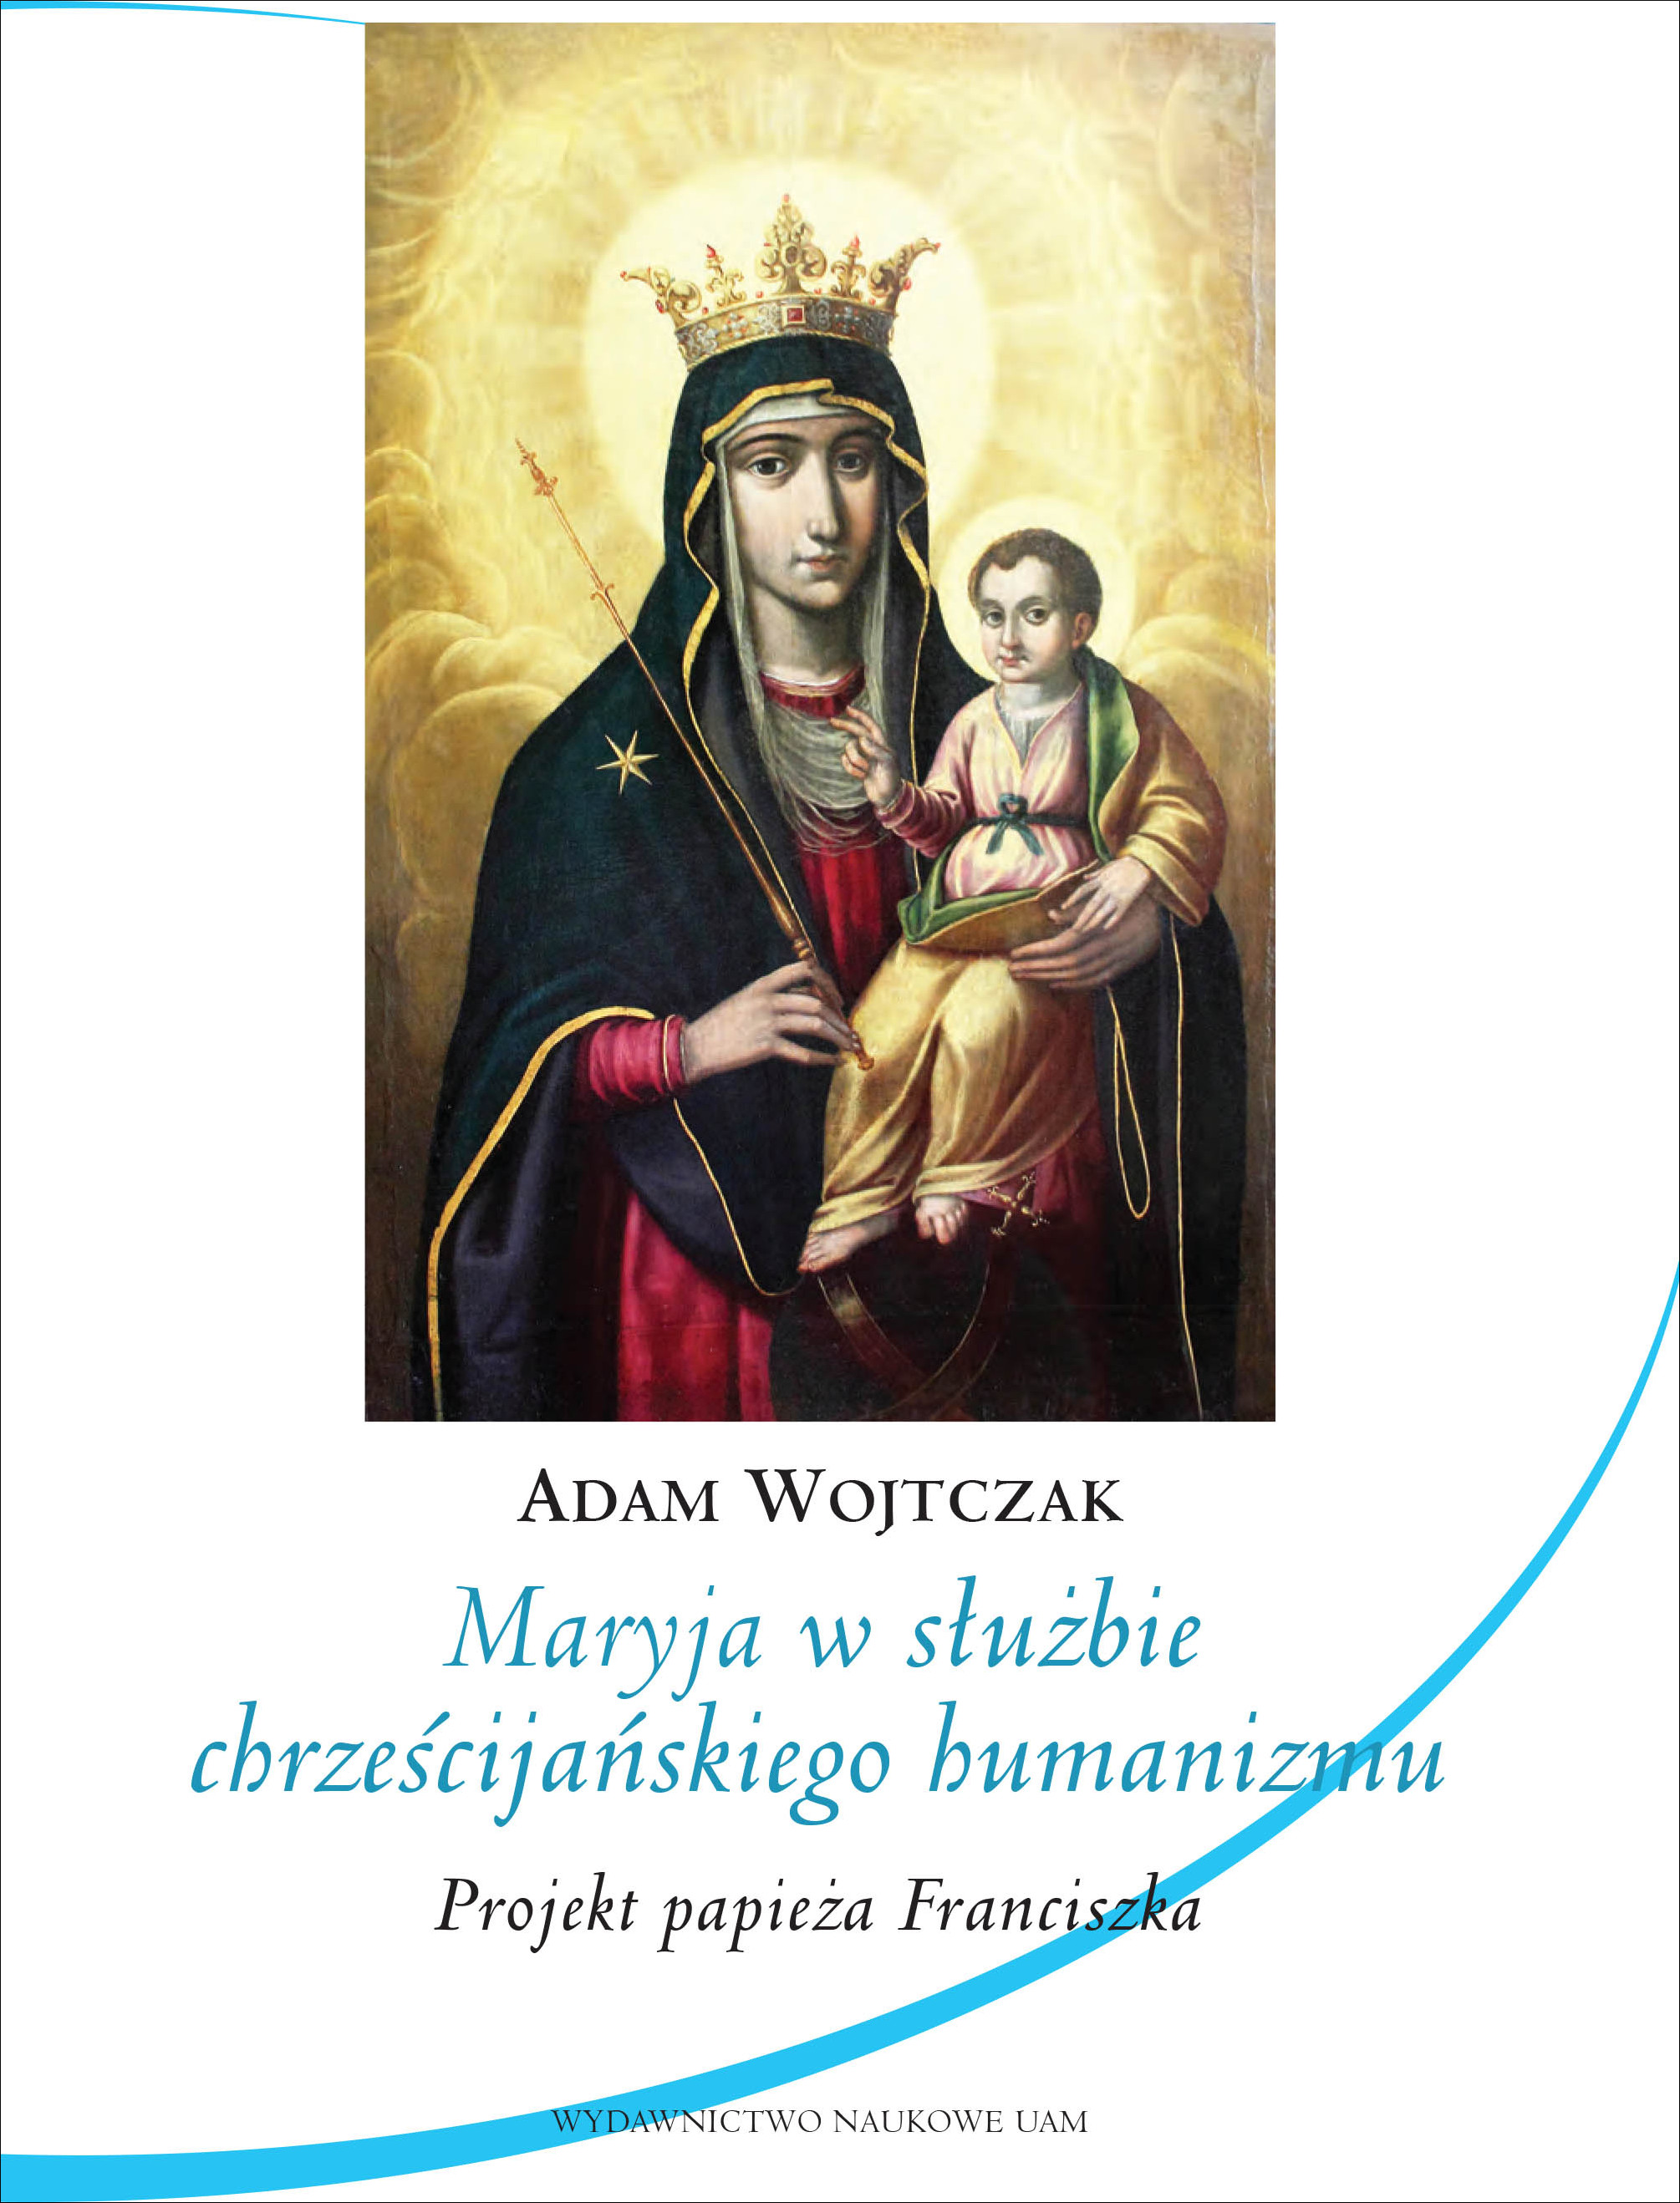 Mary in the service of Christian humanism